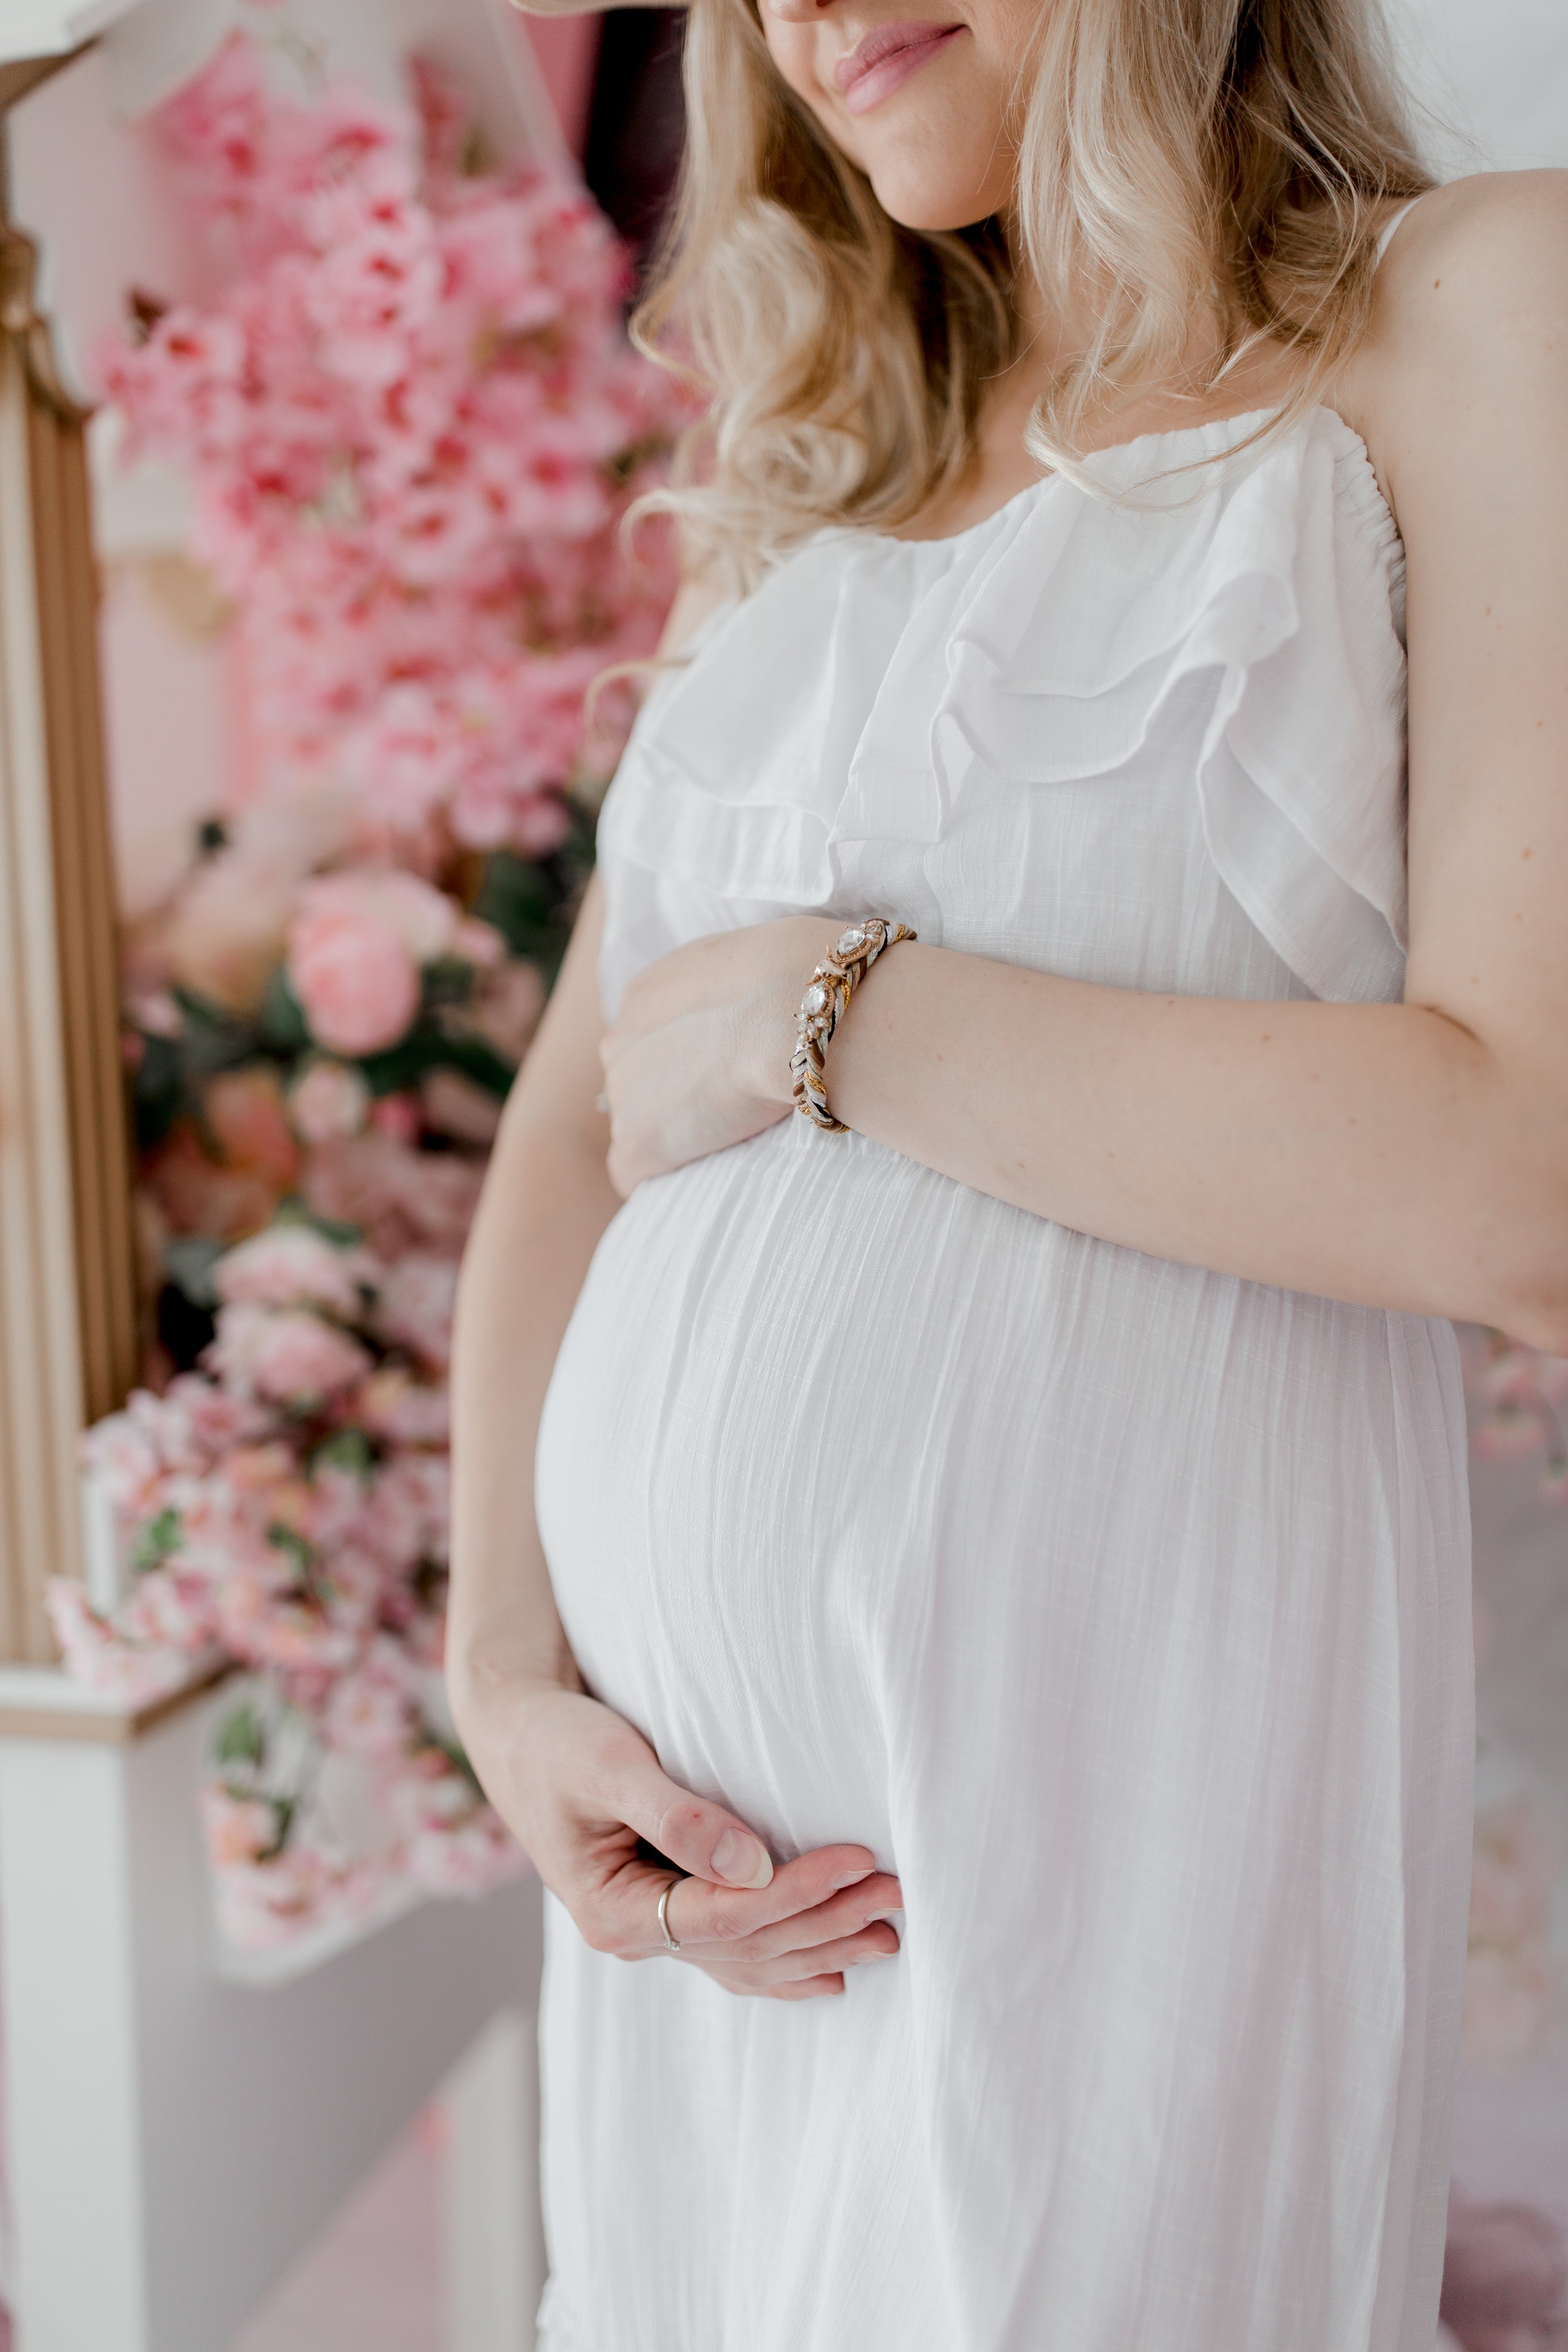 blonde woman standing by pink flowers holding pregnant belly